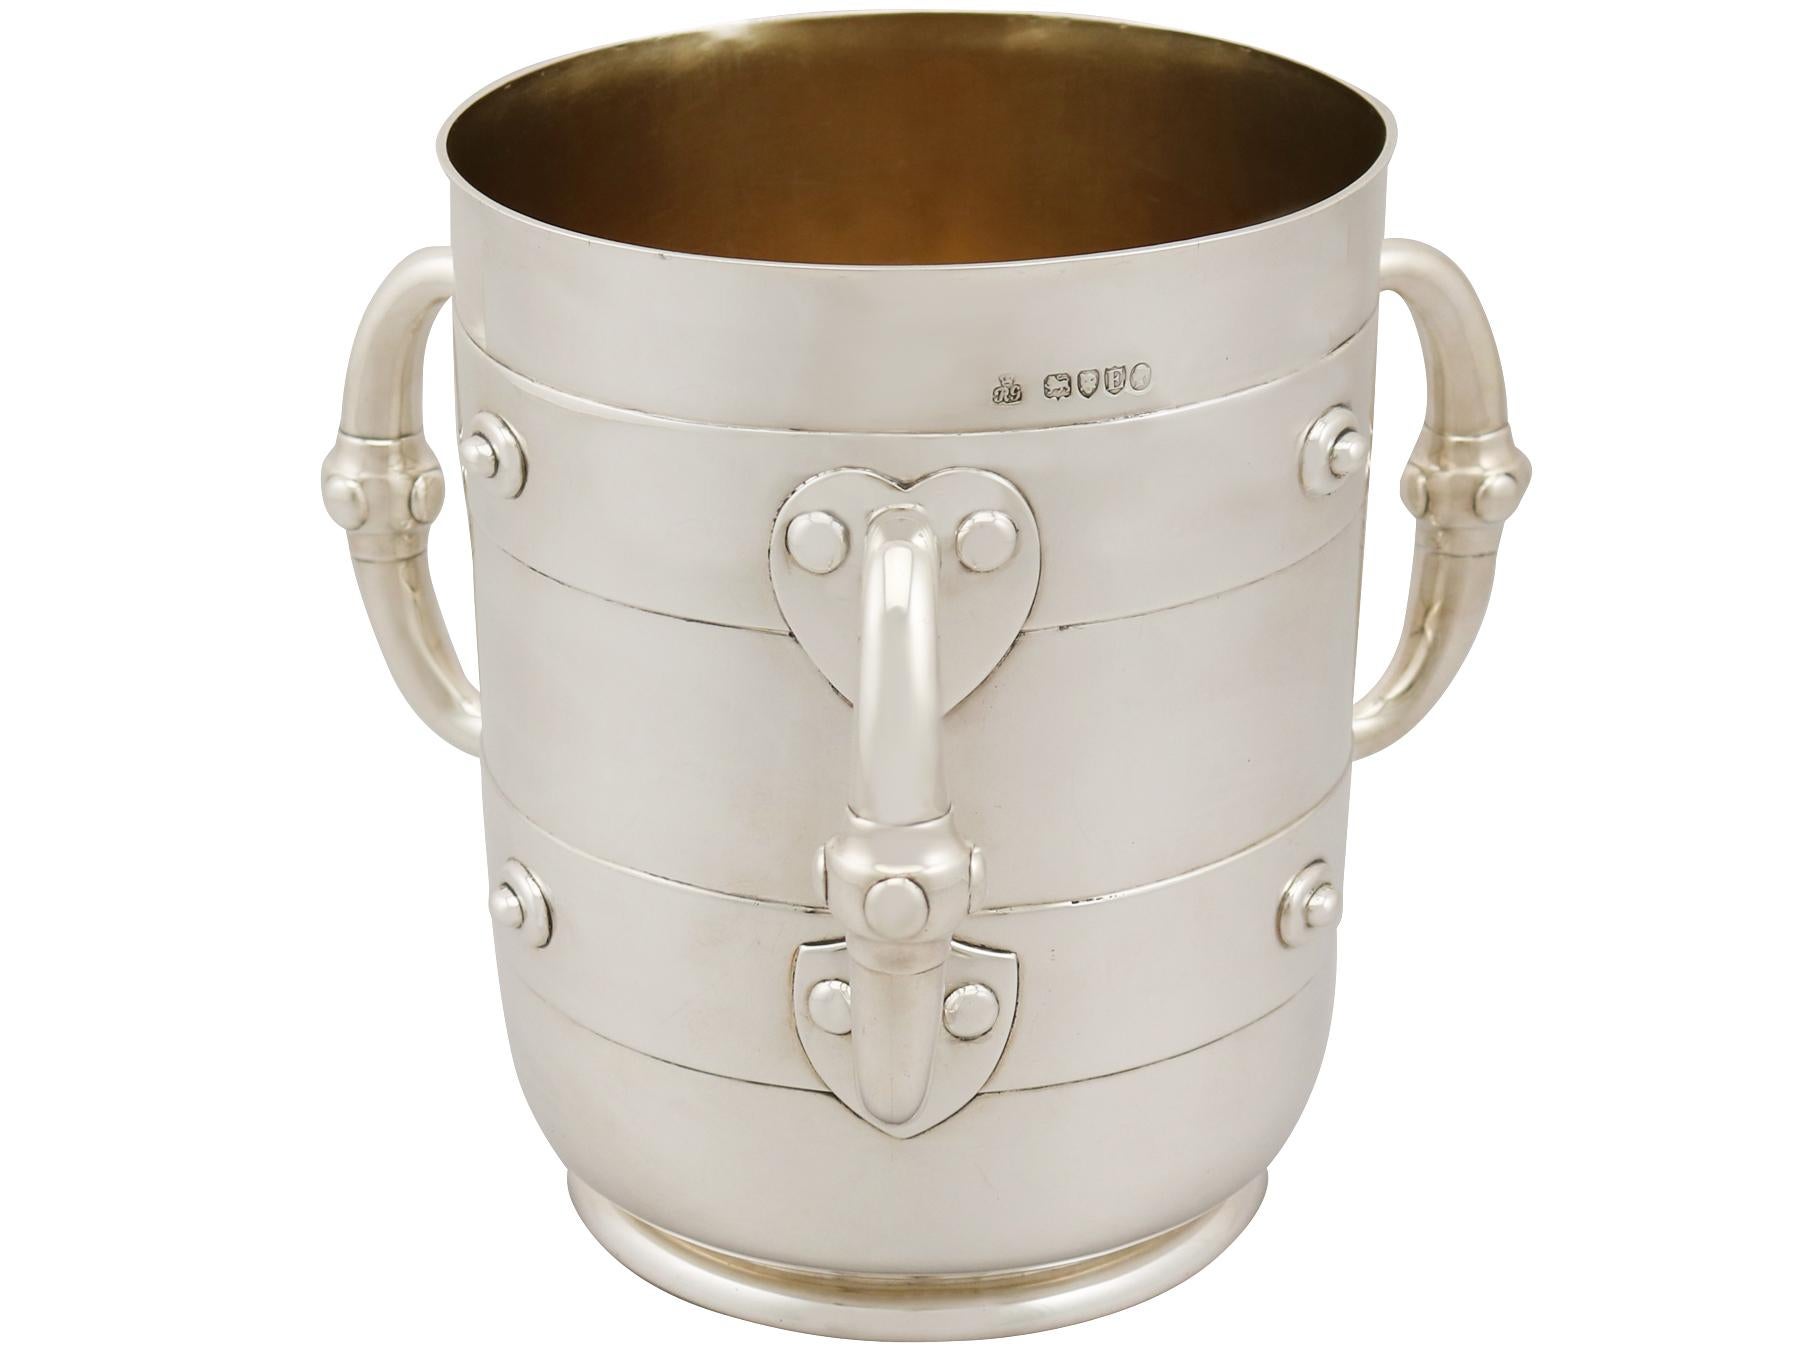 A fine and impressive antique Victorian English sterling silver presentation/champagne cup in the tyg and Arts & Crafts style; an addition to our ornamental silverware collection

This fine antique Victorian sterling silver tyg style